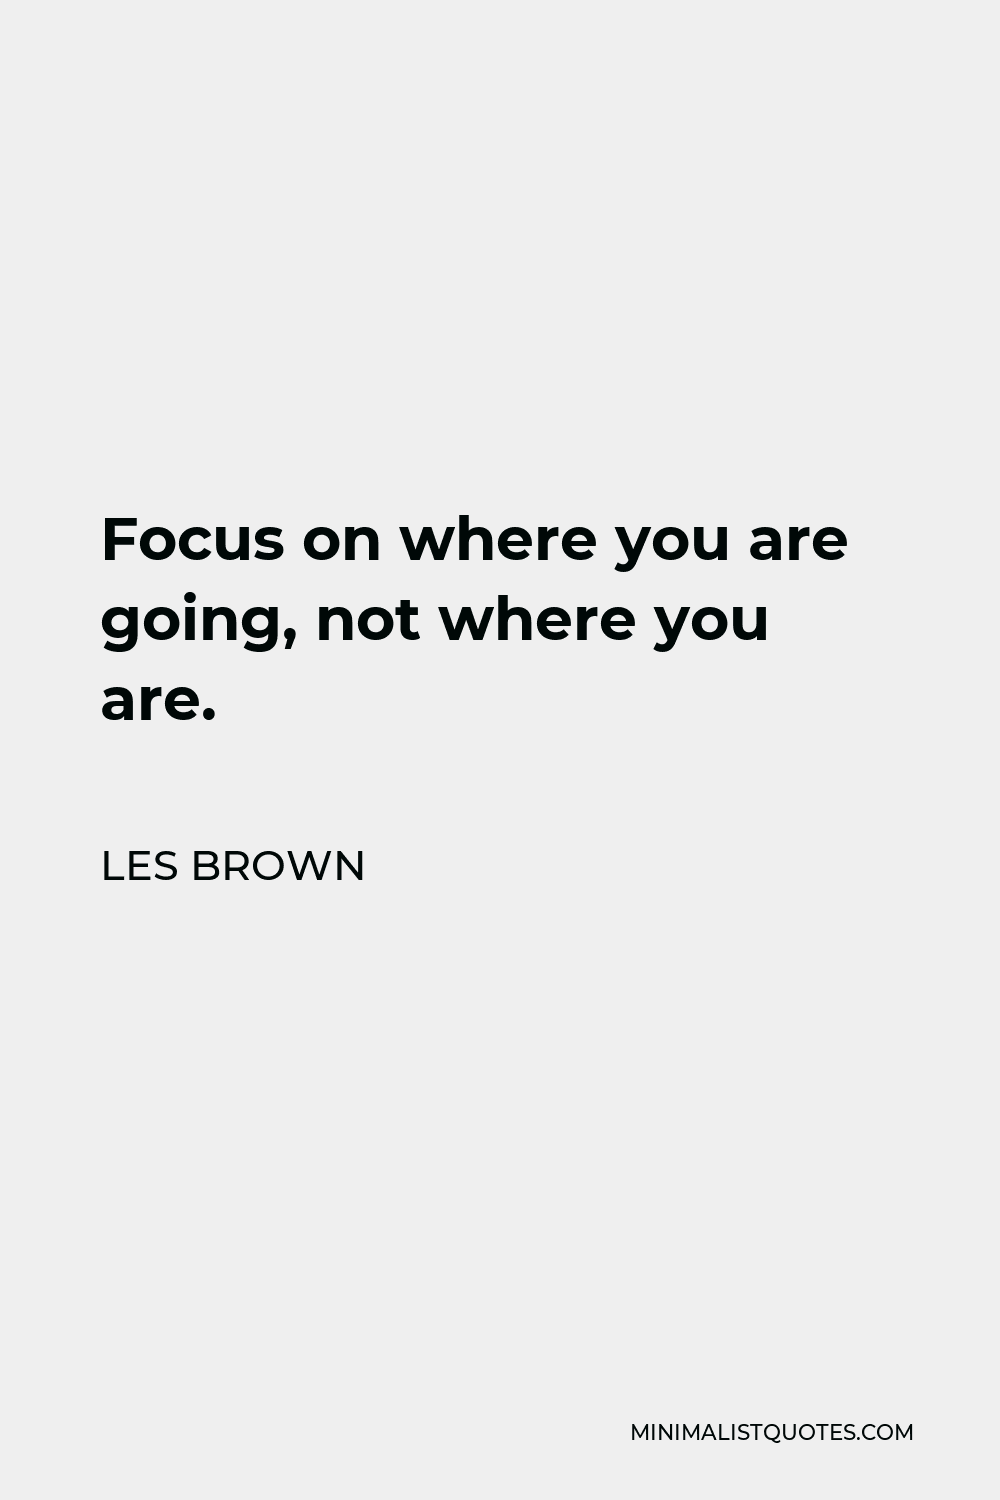 Les Brown Quote - Focus on where you are going, not where you are.